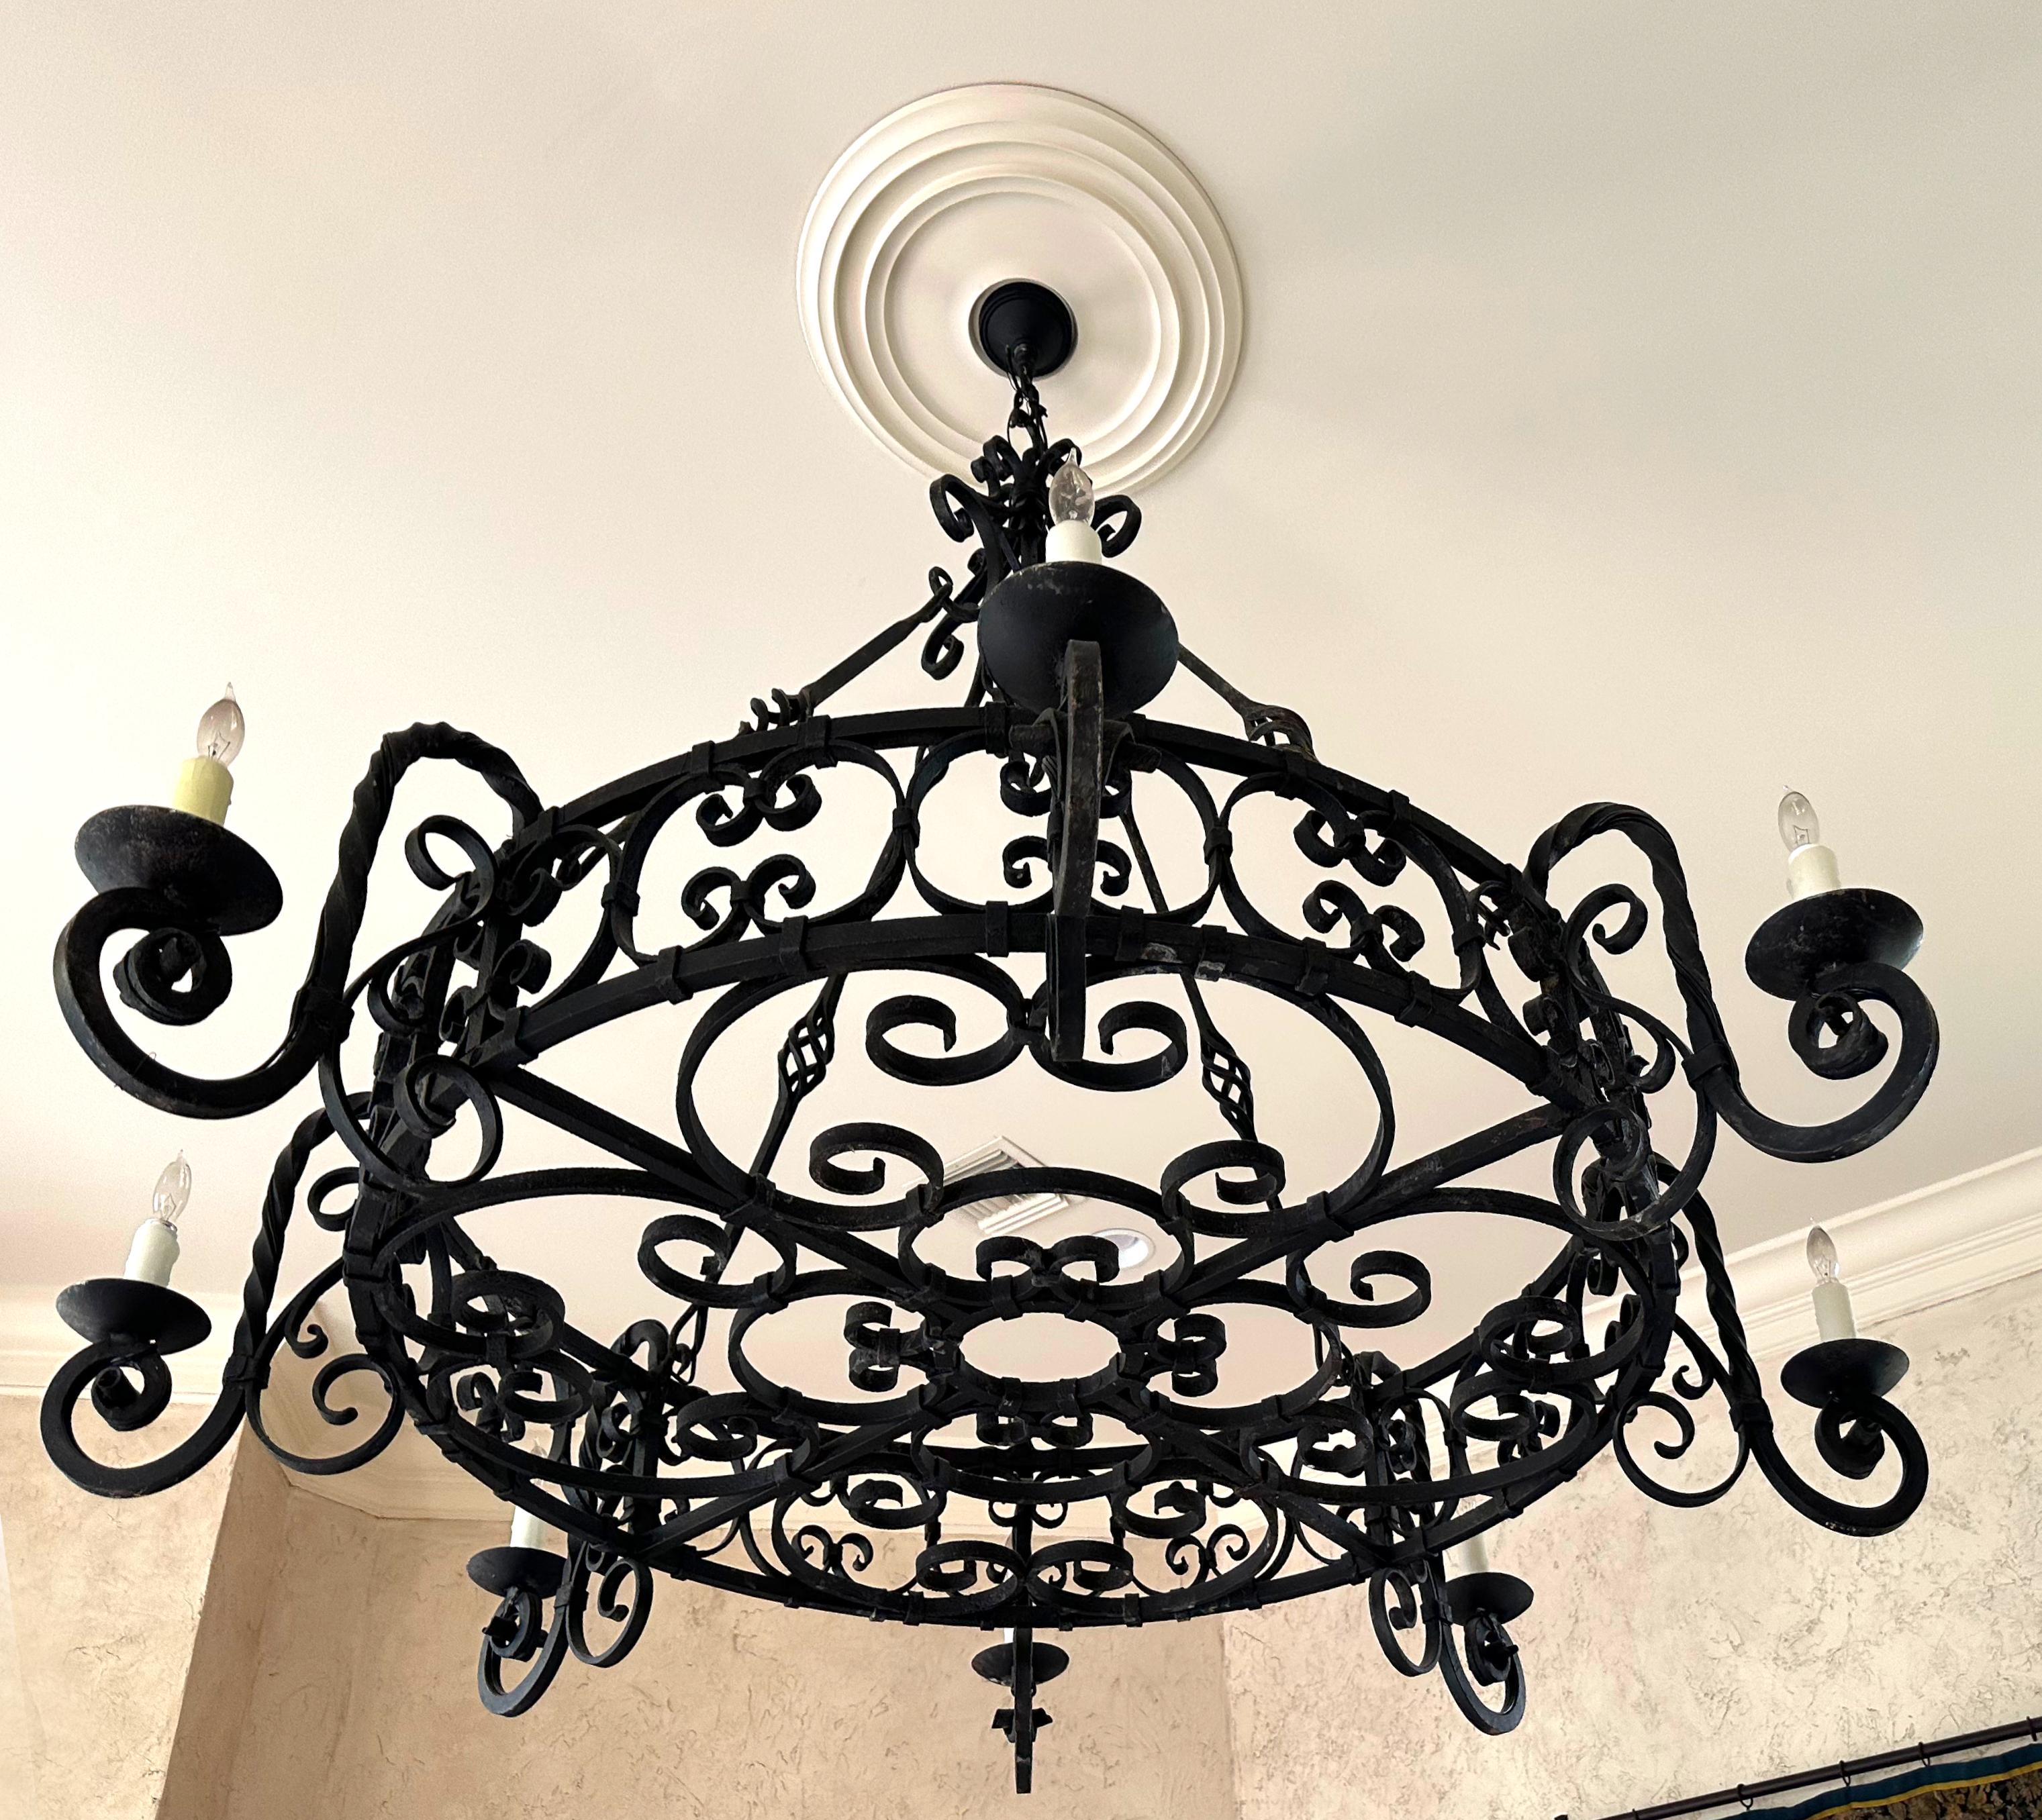 
Large Patinated Wrought Iron Eight-Light Circular Chandelier 
The circular body with inset scrolls and curved arms hung from four rods.
Height 60 in. (152.4 cm.), Diameter (approx) 72 in. (182.88 cm.)